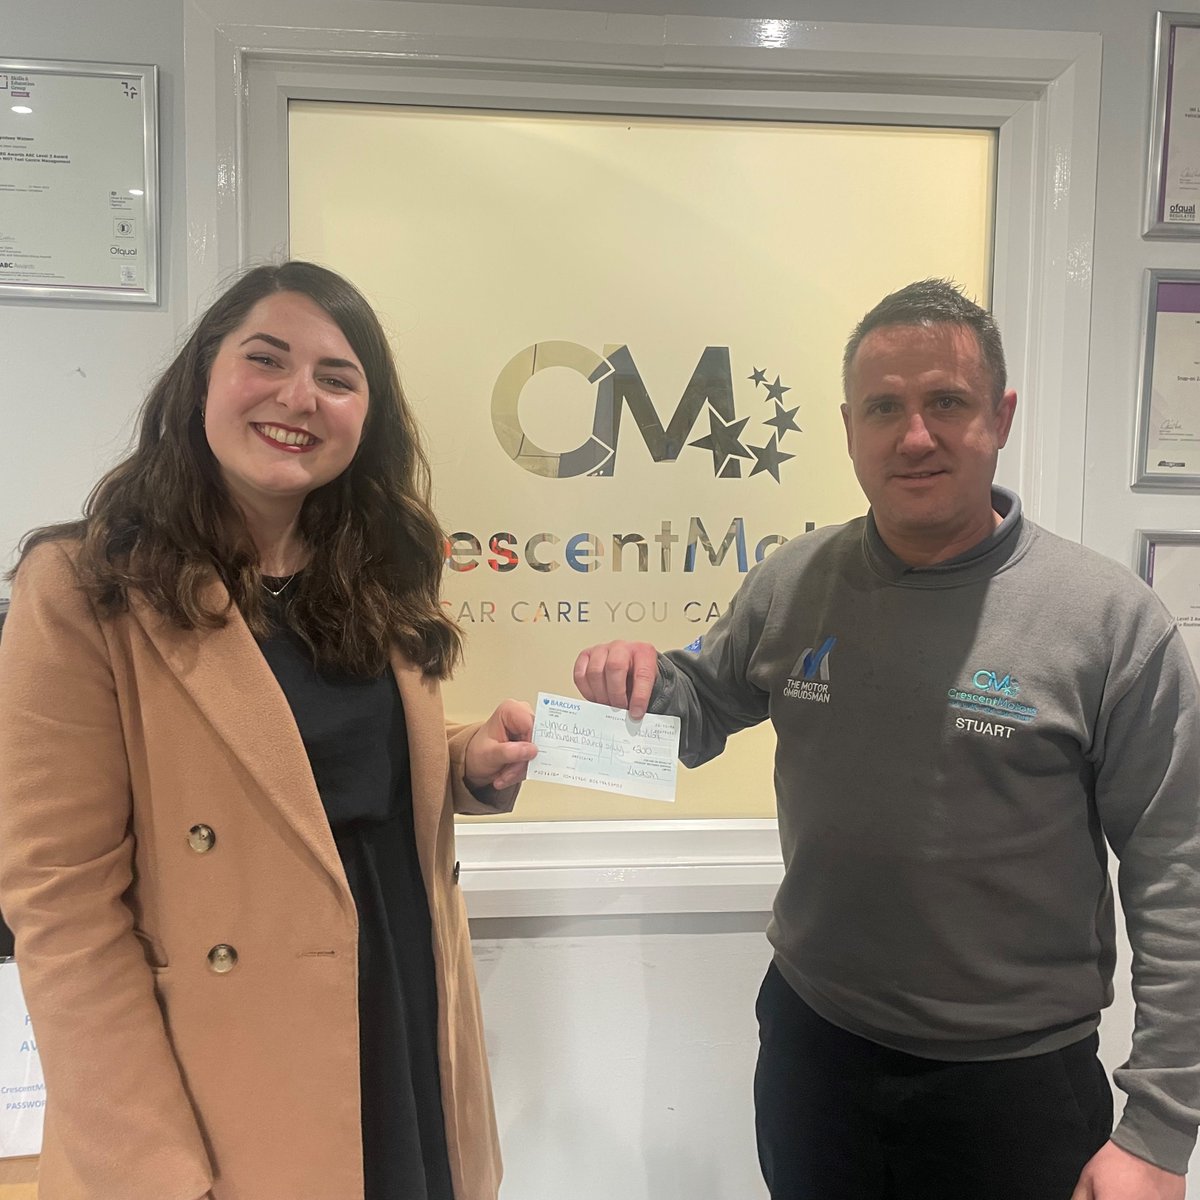 Thanks to Crescent Motors for their donation last week! We get a percentage of the proceeds from the courtesy car when people borrow it and we popped into the office last week to collect a cheque, so thank you all! 🚗 #YMCA #YMCABurton #Charity